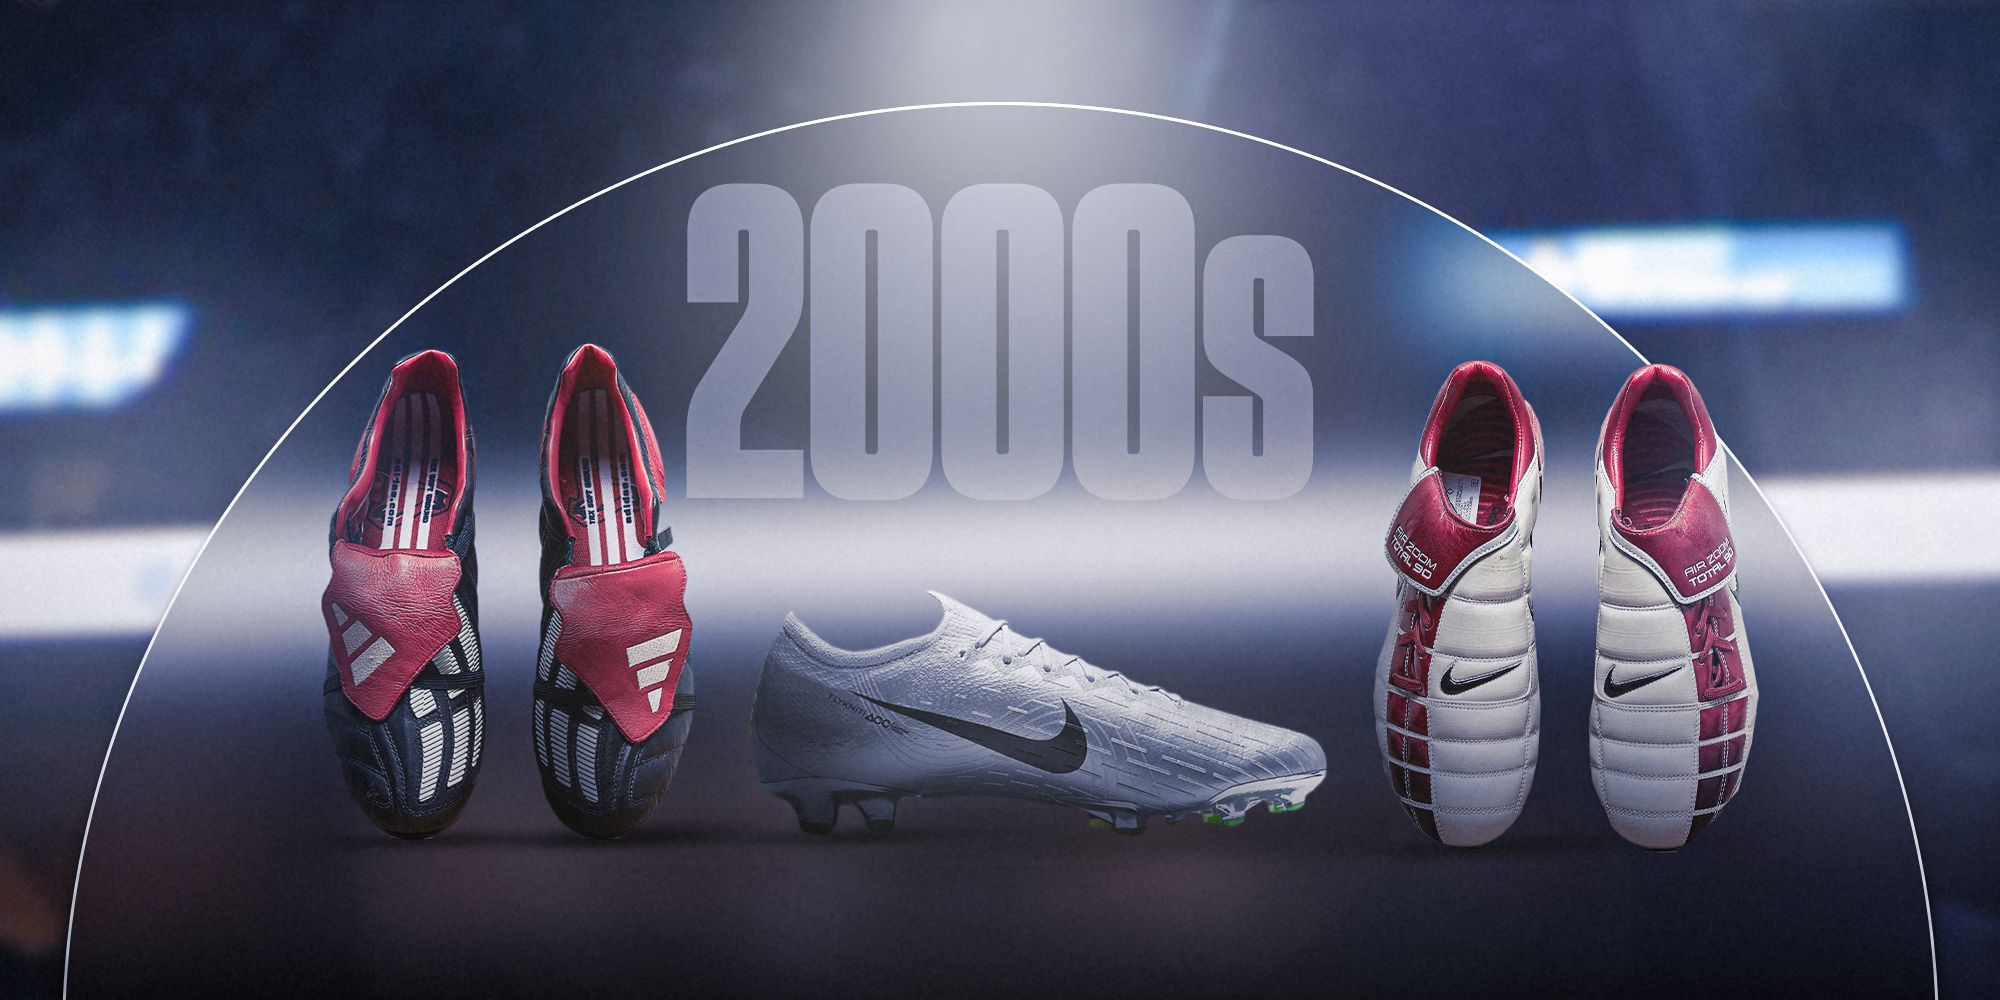 Collage of football boots from 2000s.